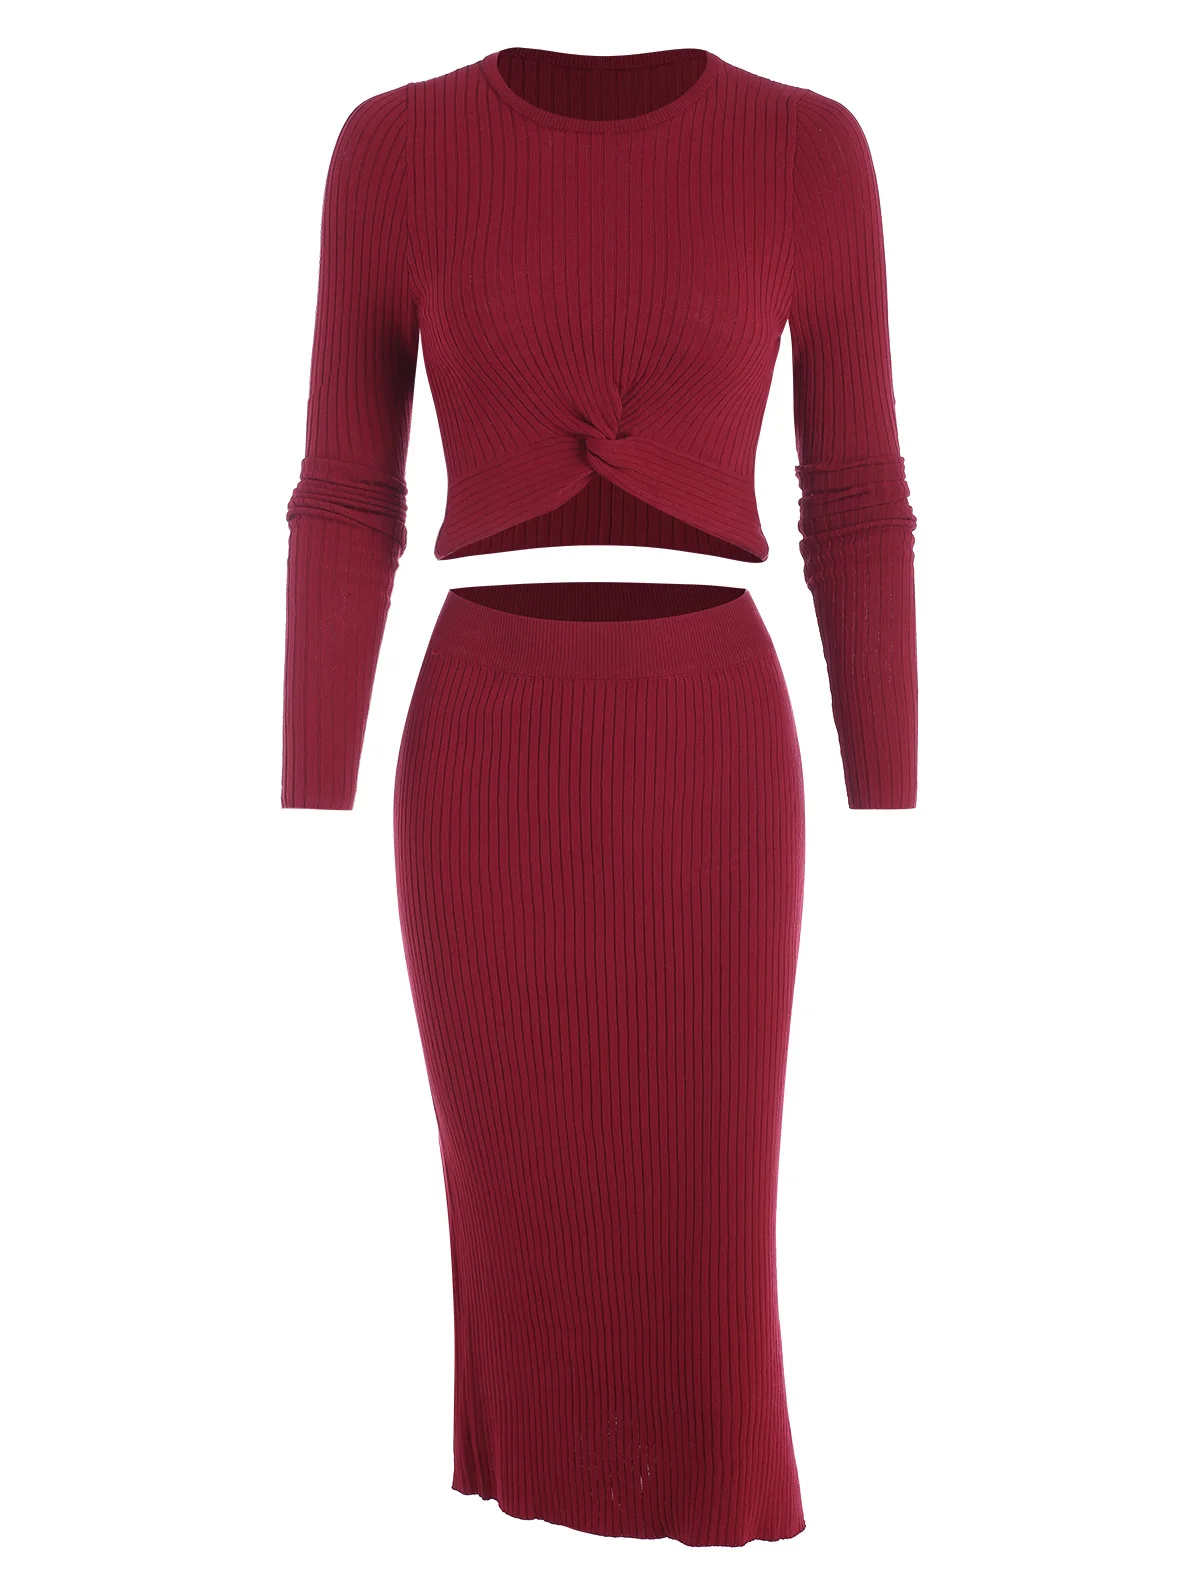 ZAFUL Wide Rib Twist Knit Slinky Two Piece Set Women Crop Top and Midi Skirt Set Going Out Co Ords Spring Autumn